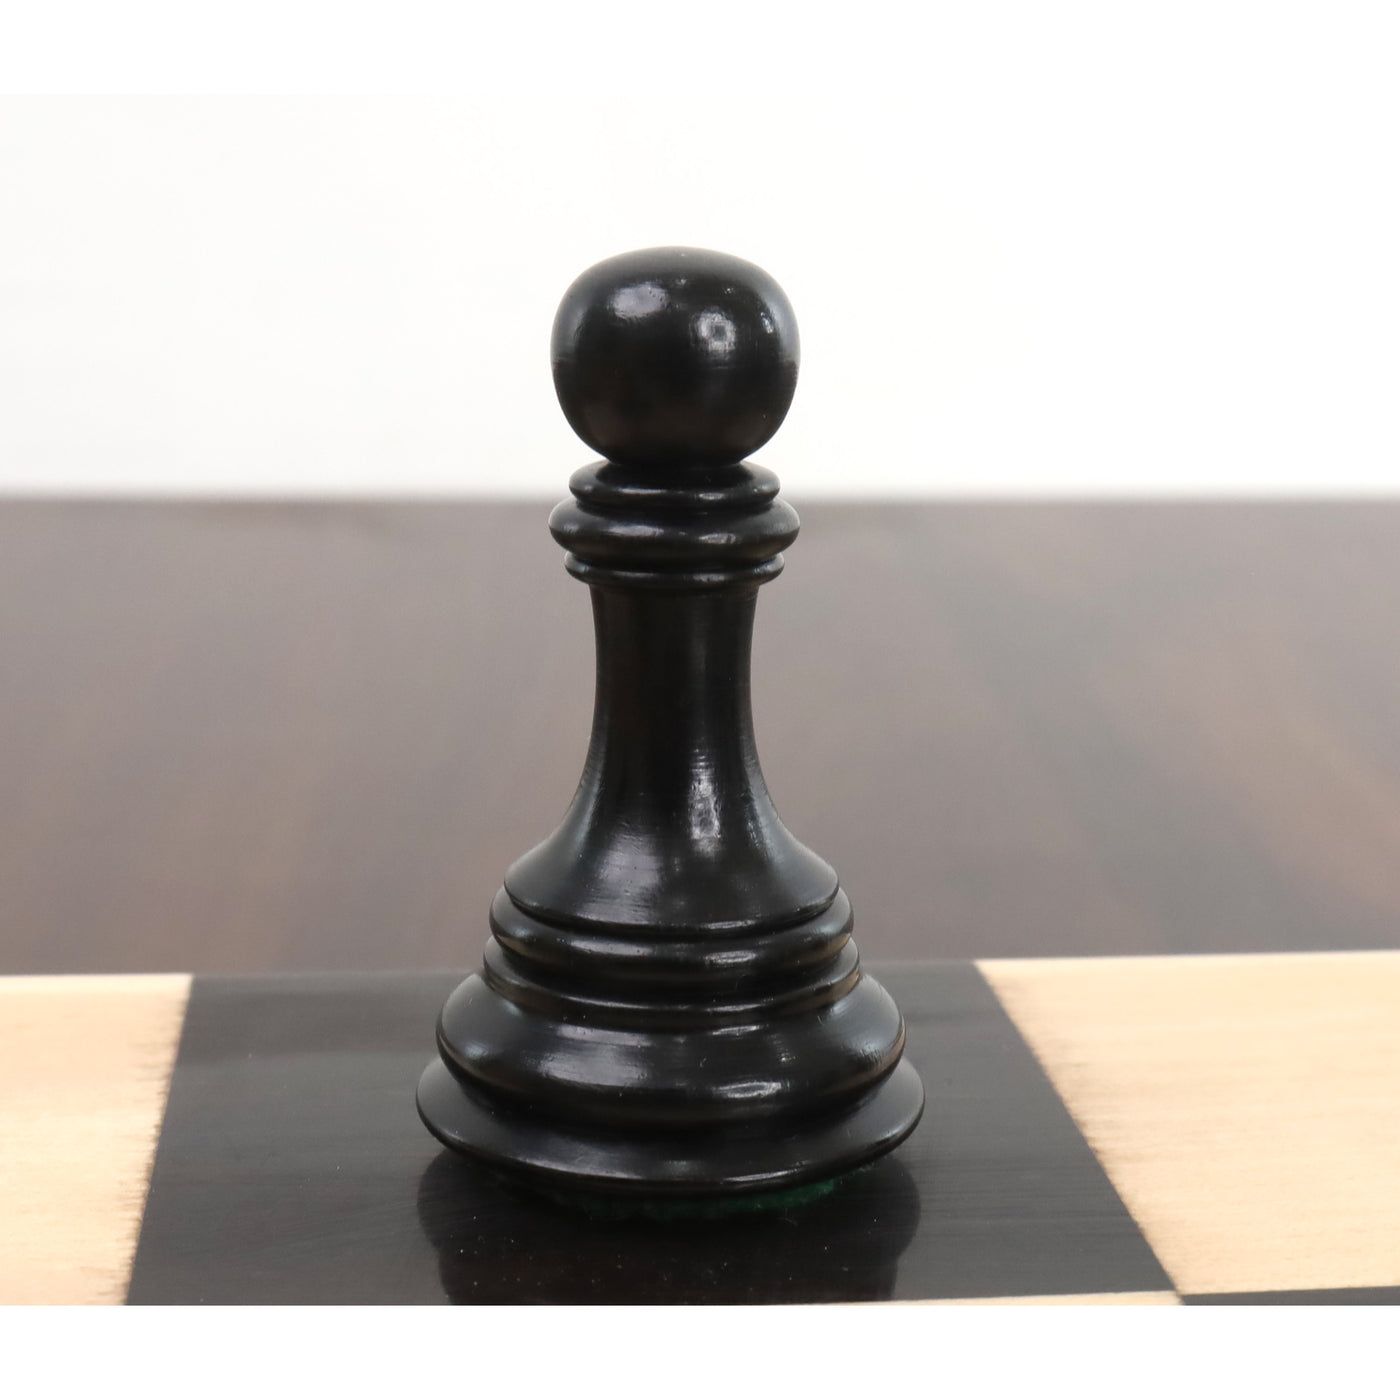 Slightly Imperfect 3.9" New Columbian Staunton Chess Pieces Only Set - Ebony Wood - Double Weighted